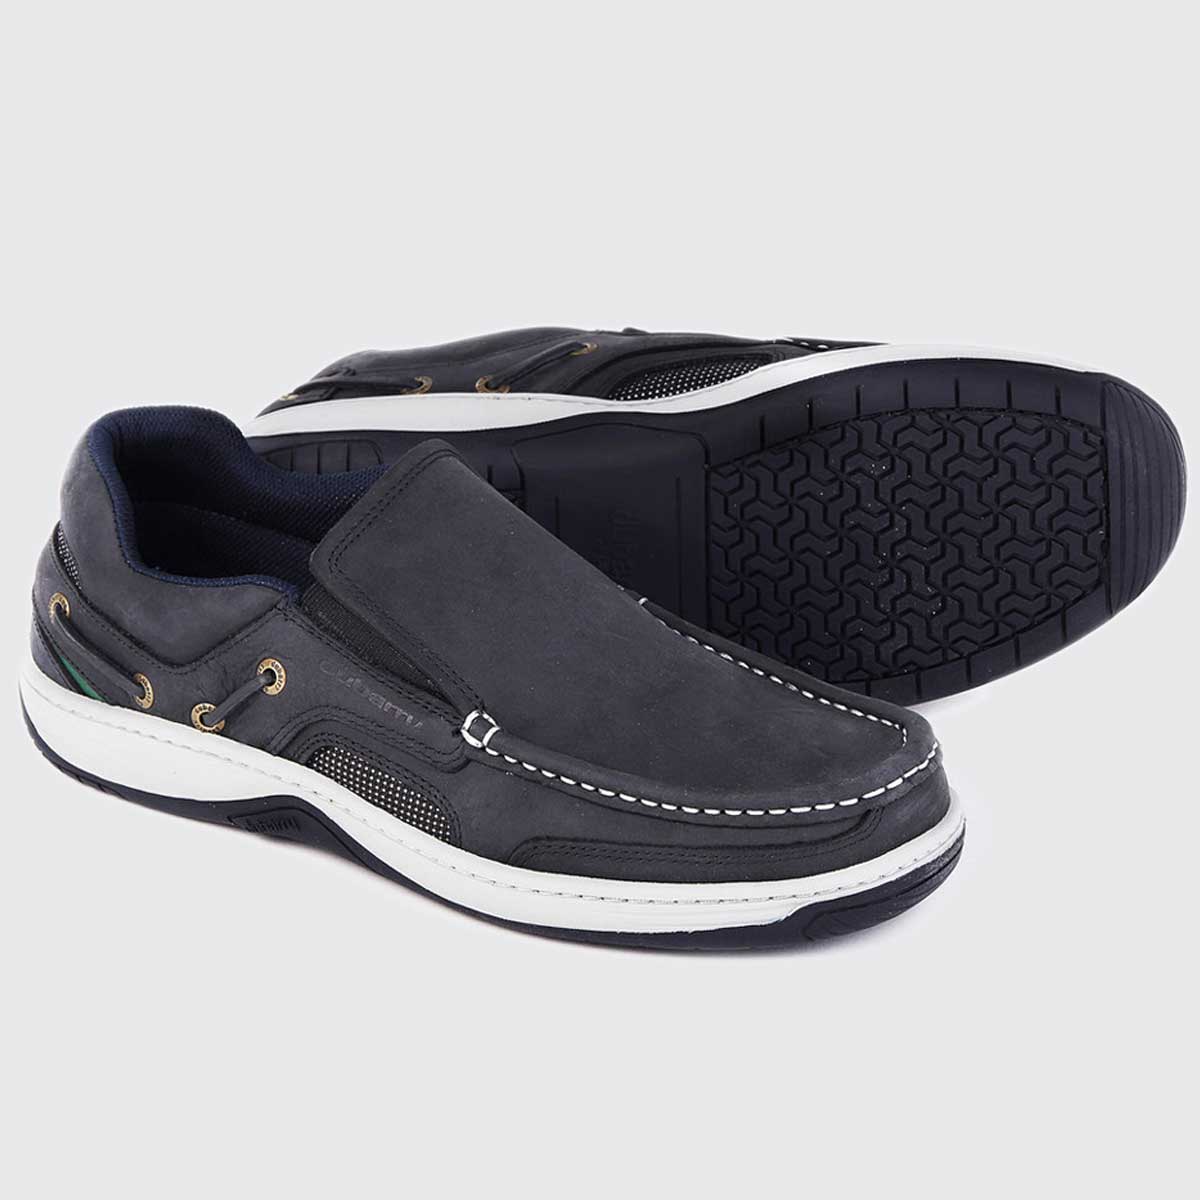 DUBARRY Men's Yacht Deck Shoes - Loafer - Navy